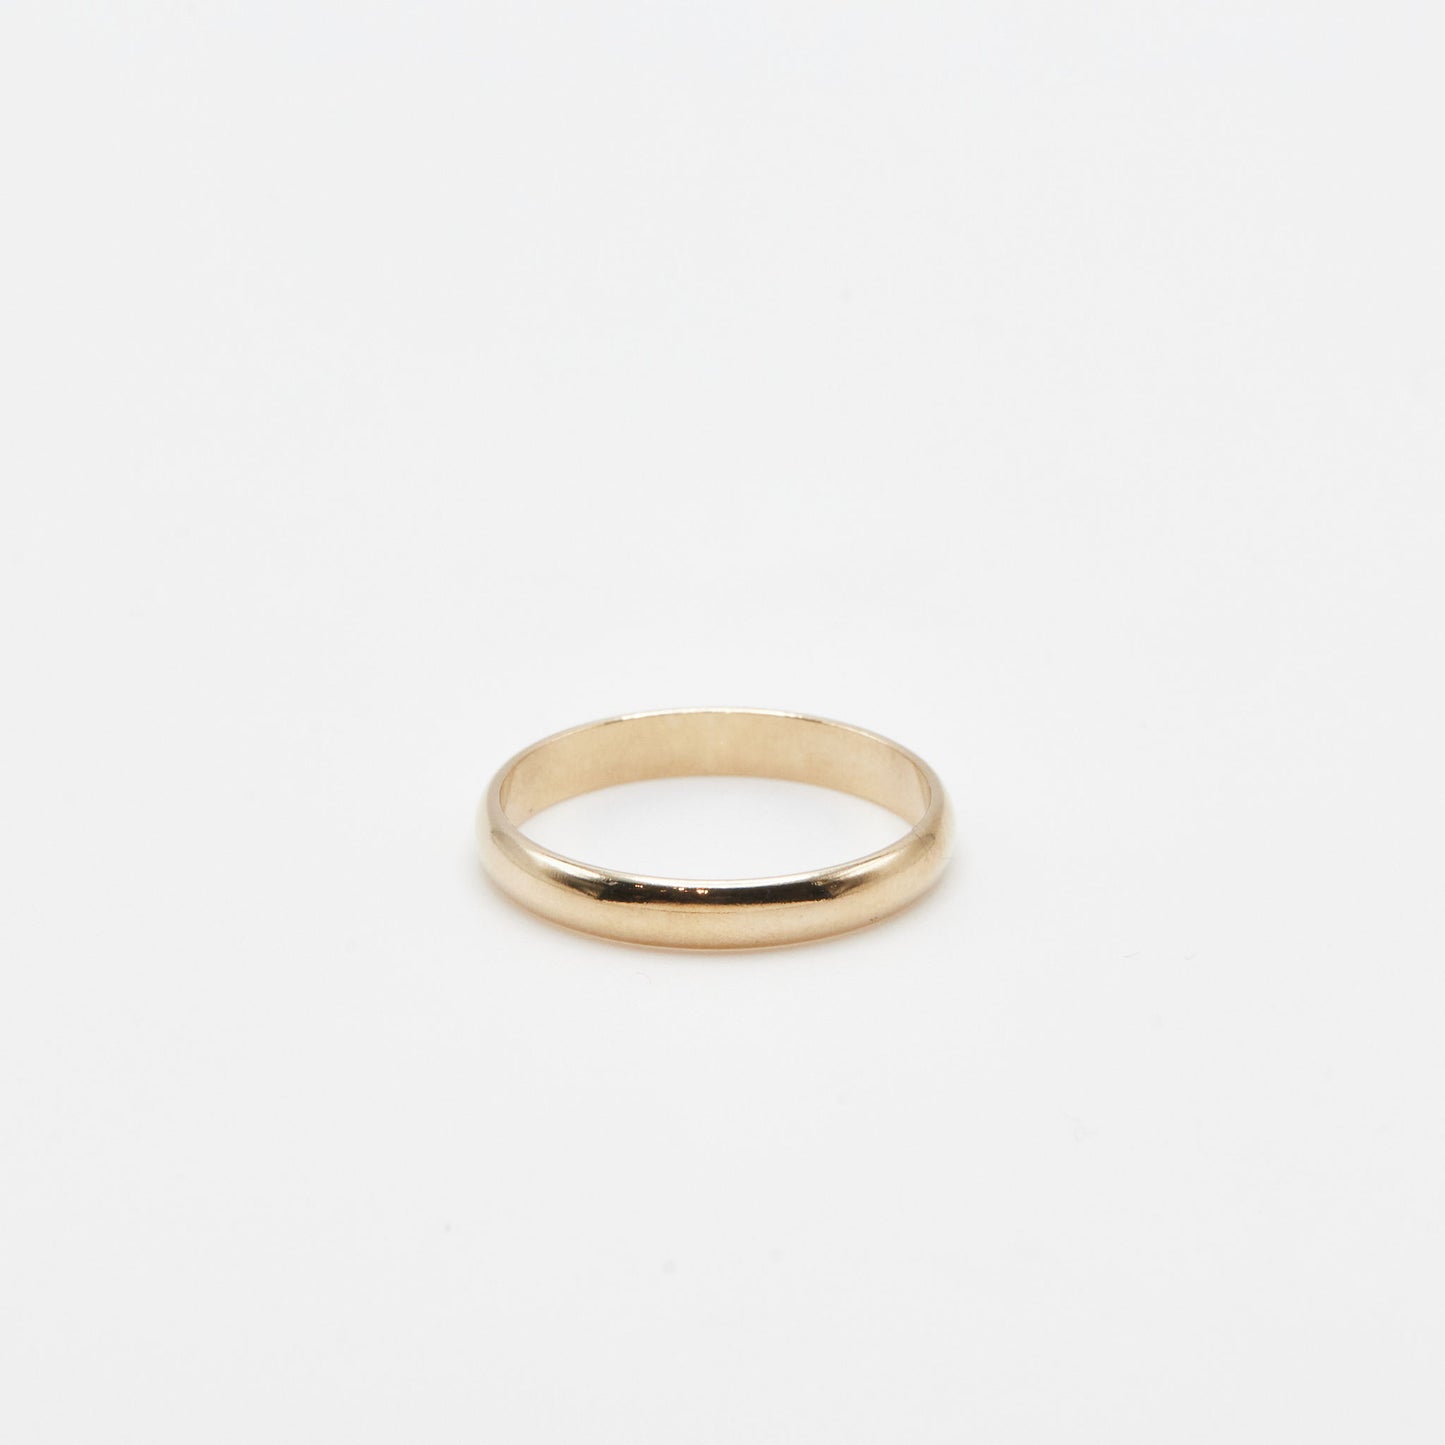 3 mm yellow gold half round wedding band on a white background